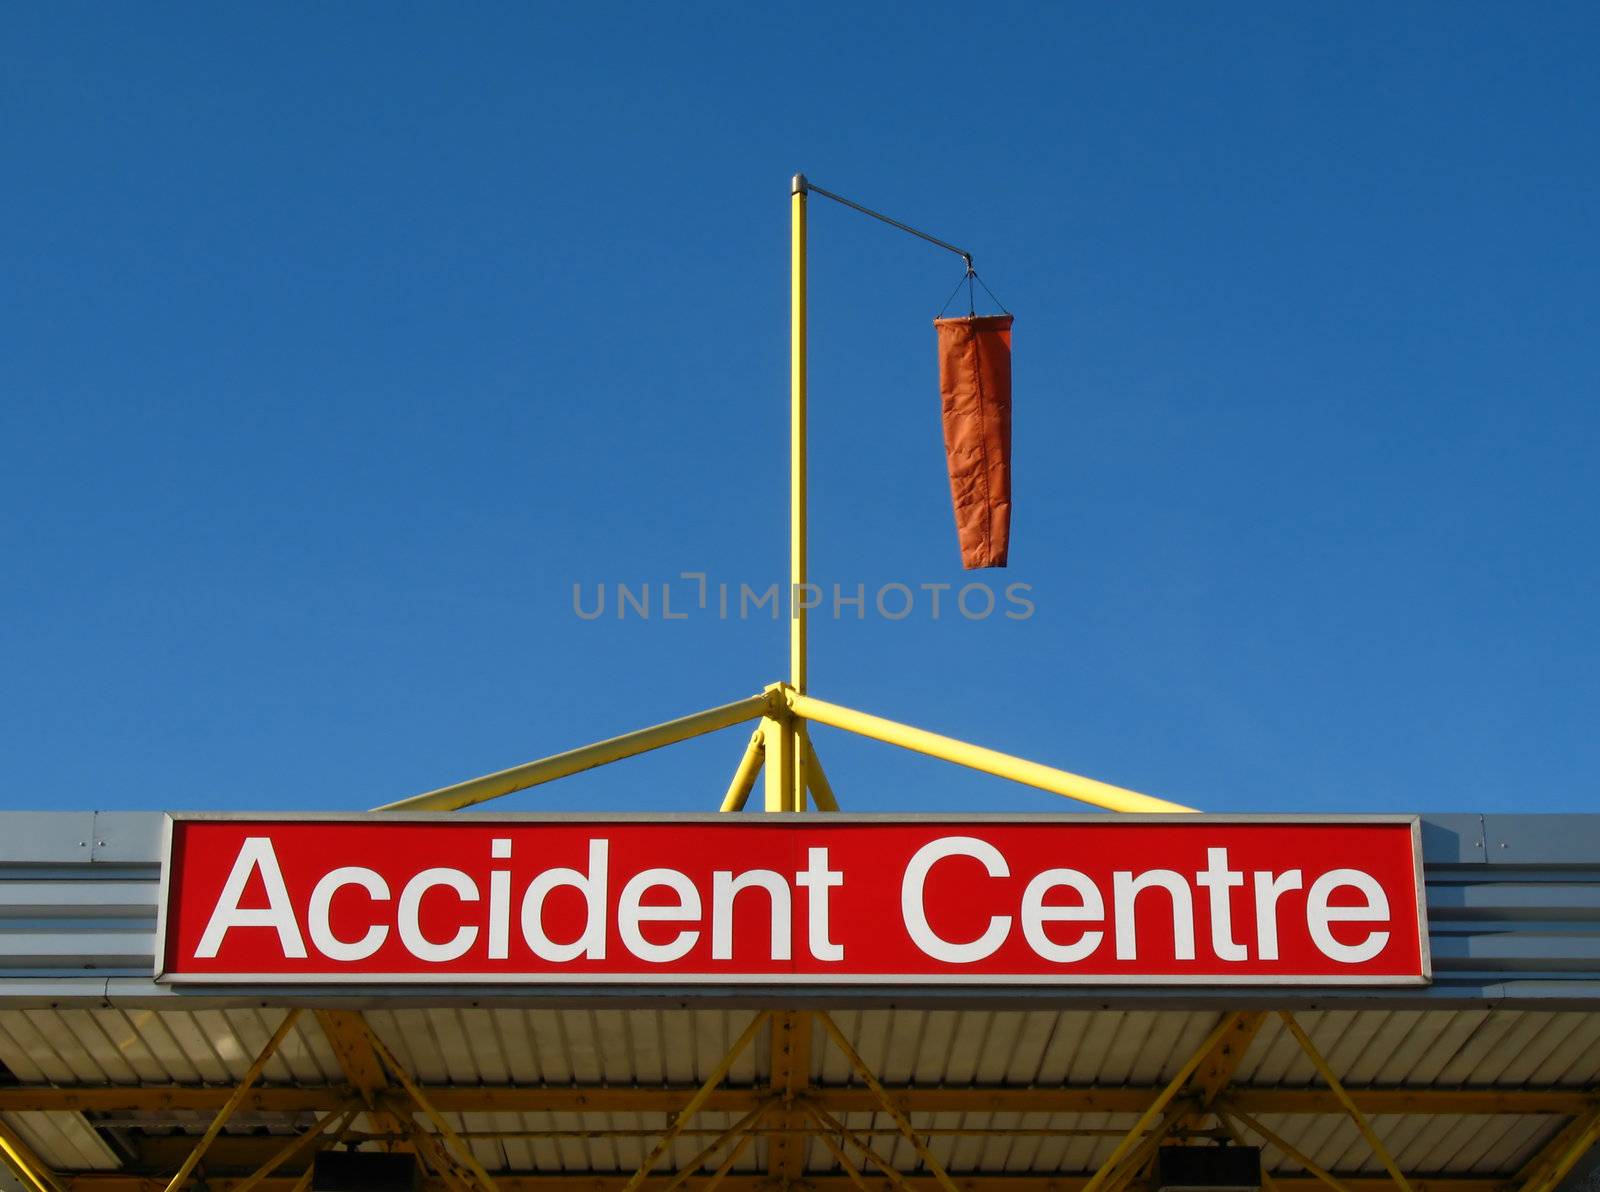 The windsock is above the entrance to the Accident Centre at The Royal Bournemouth Hospitals, near Littledown and Cooper Dean. This is adjacent to a helicopter landing pad.
